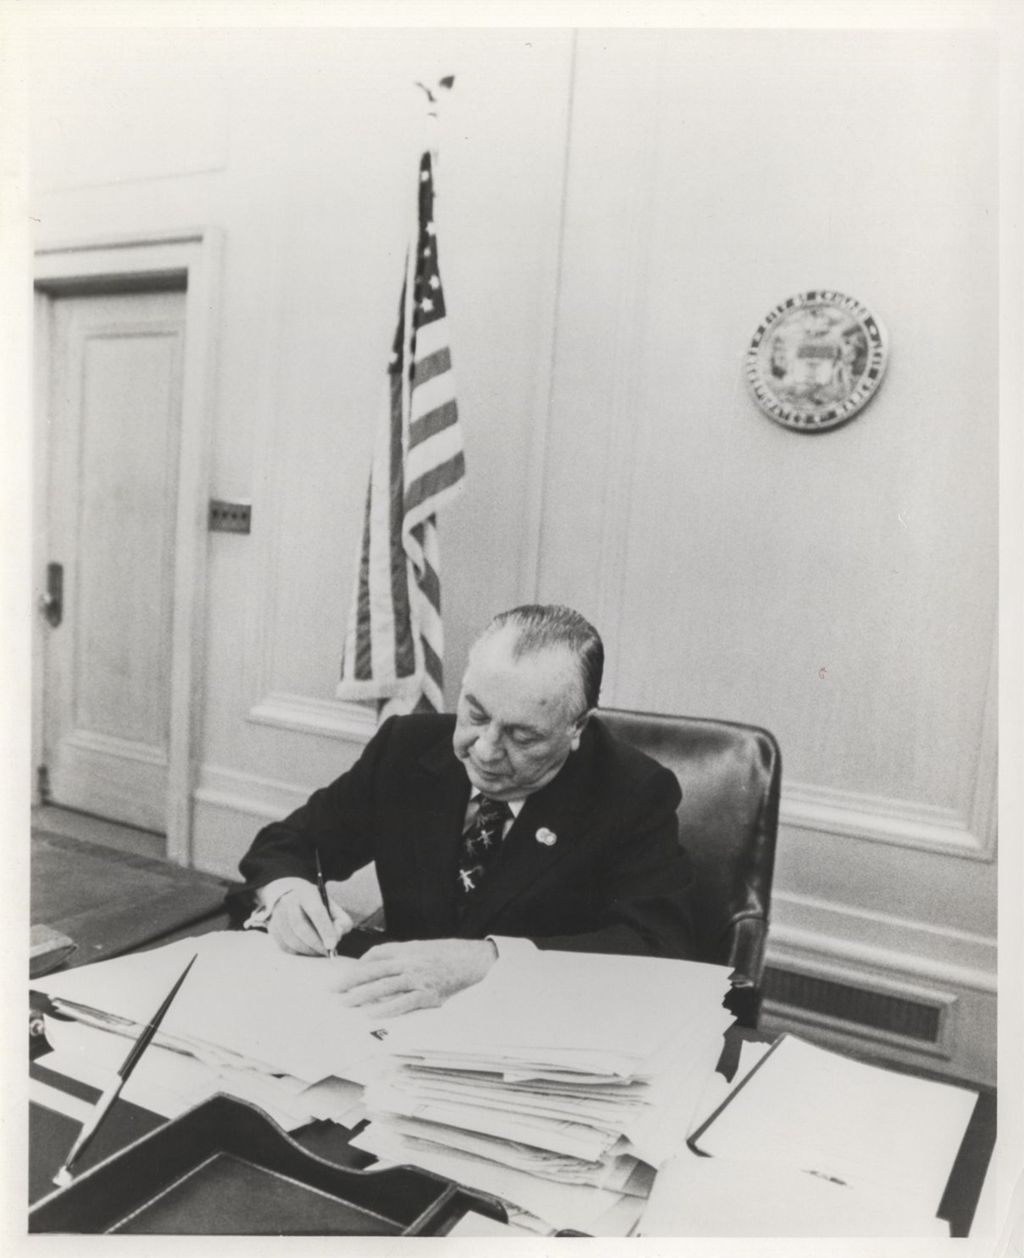 Miniature of Richard J. Daley signing documents at his desk in City Hall